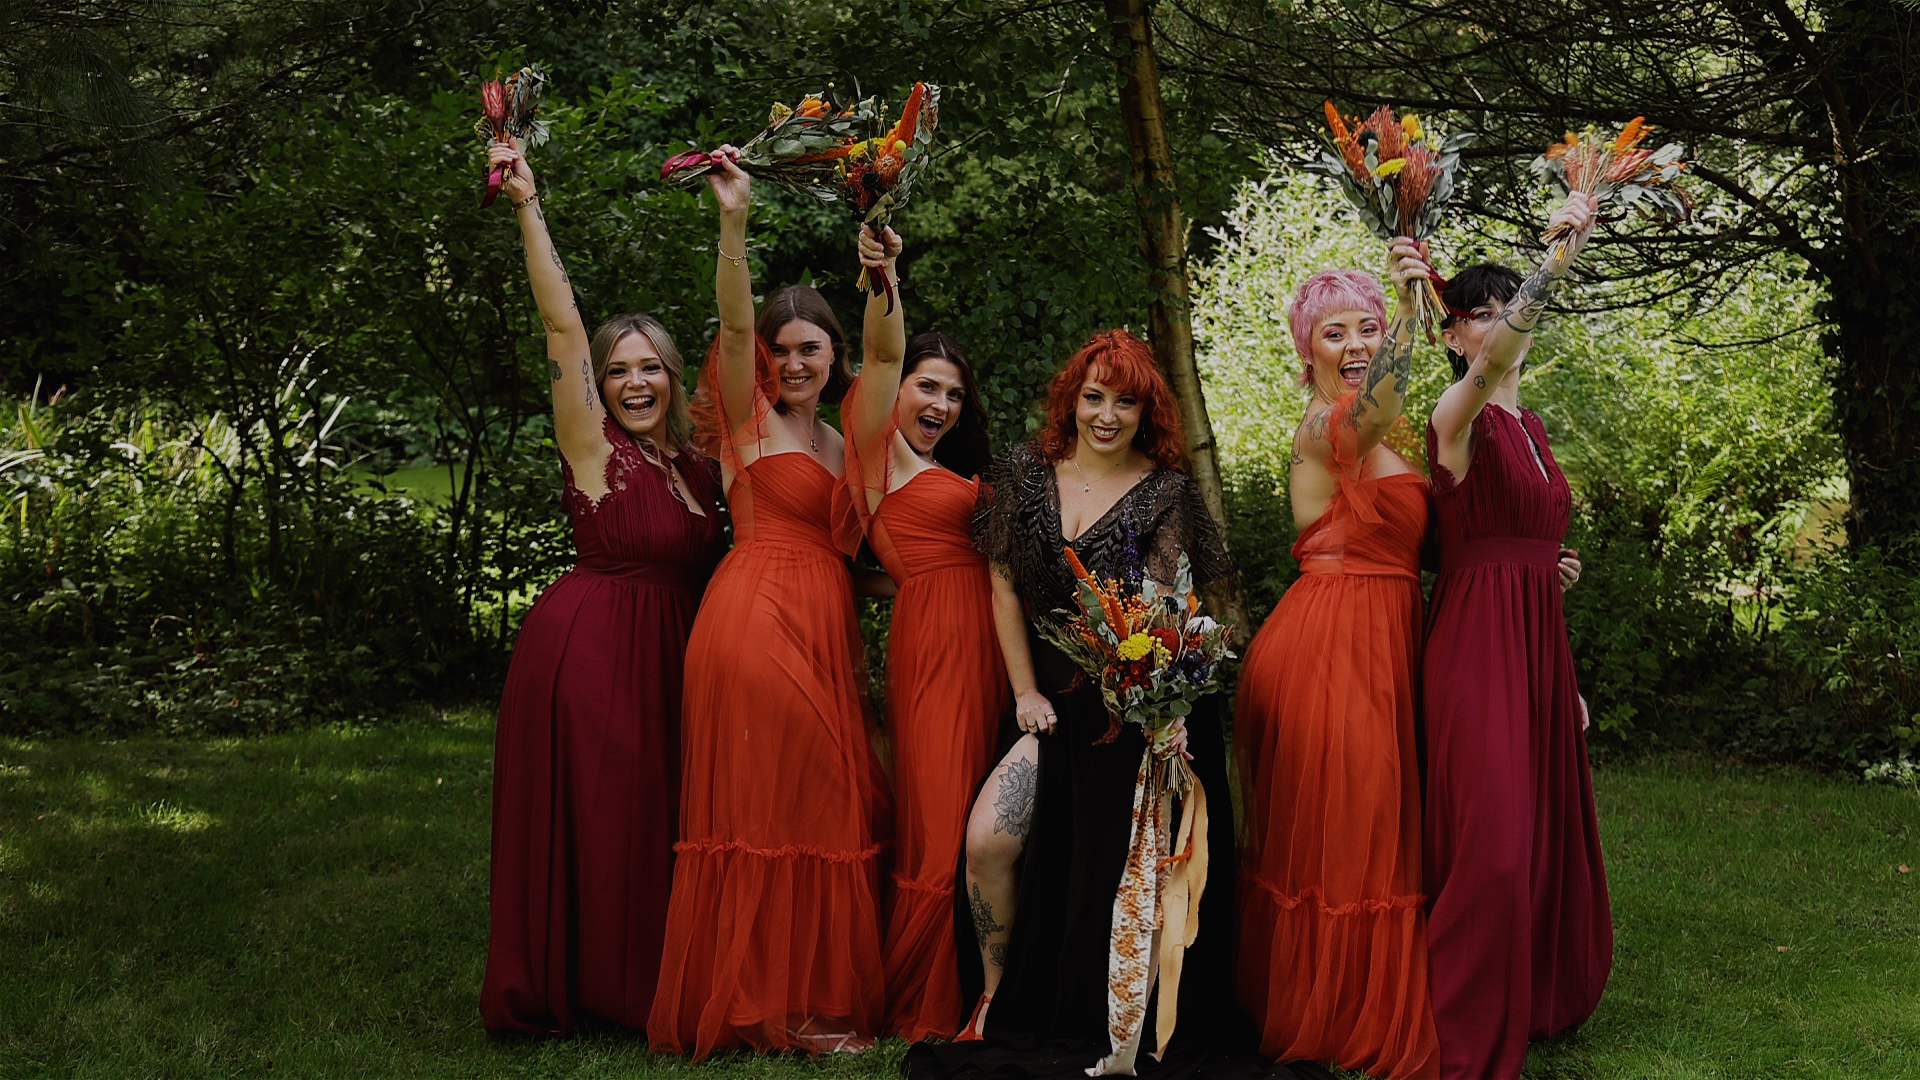 A bridal party cheering with their bouquets in the air at Mount Edgcumbe